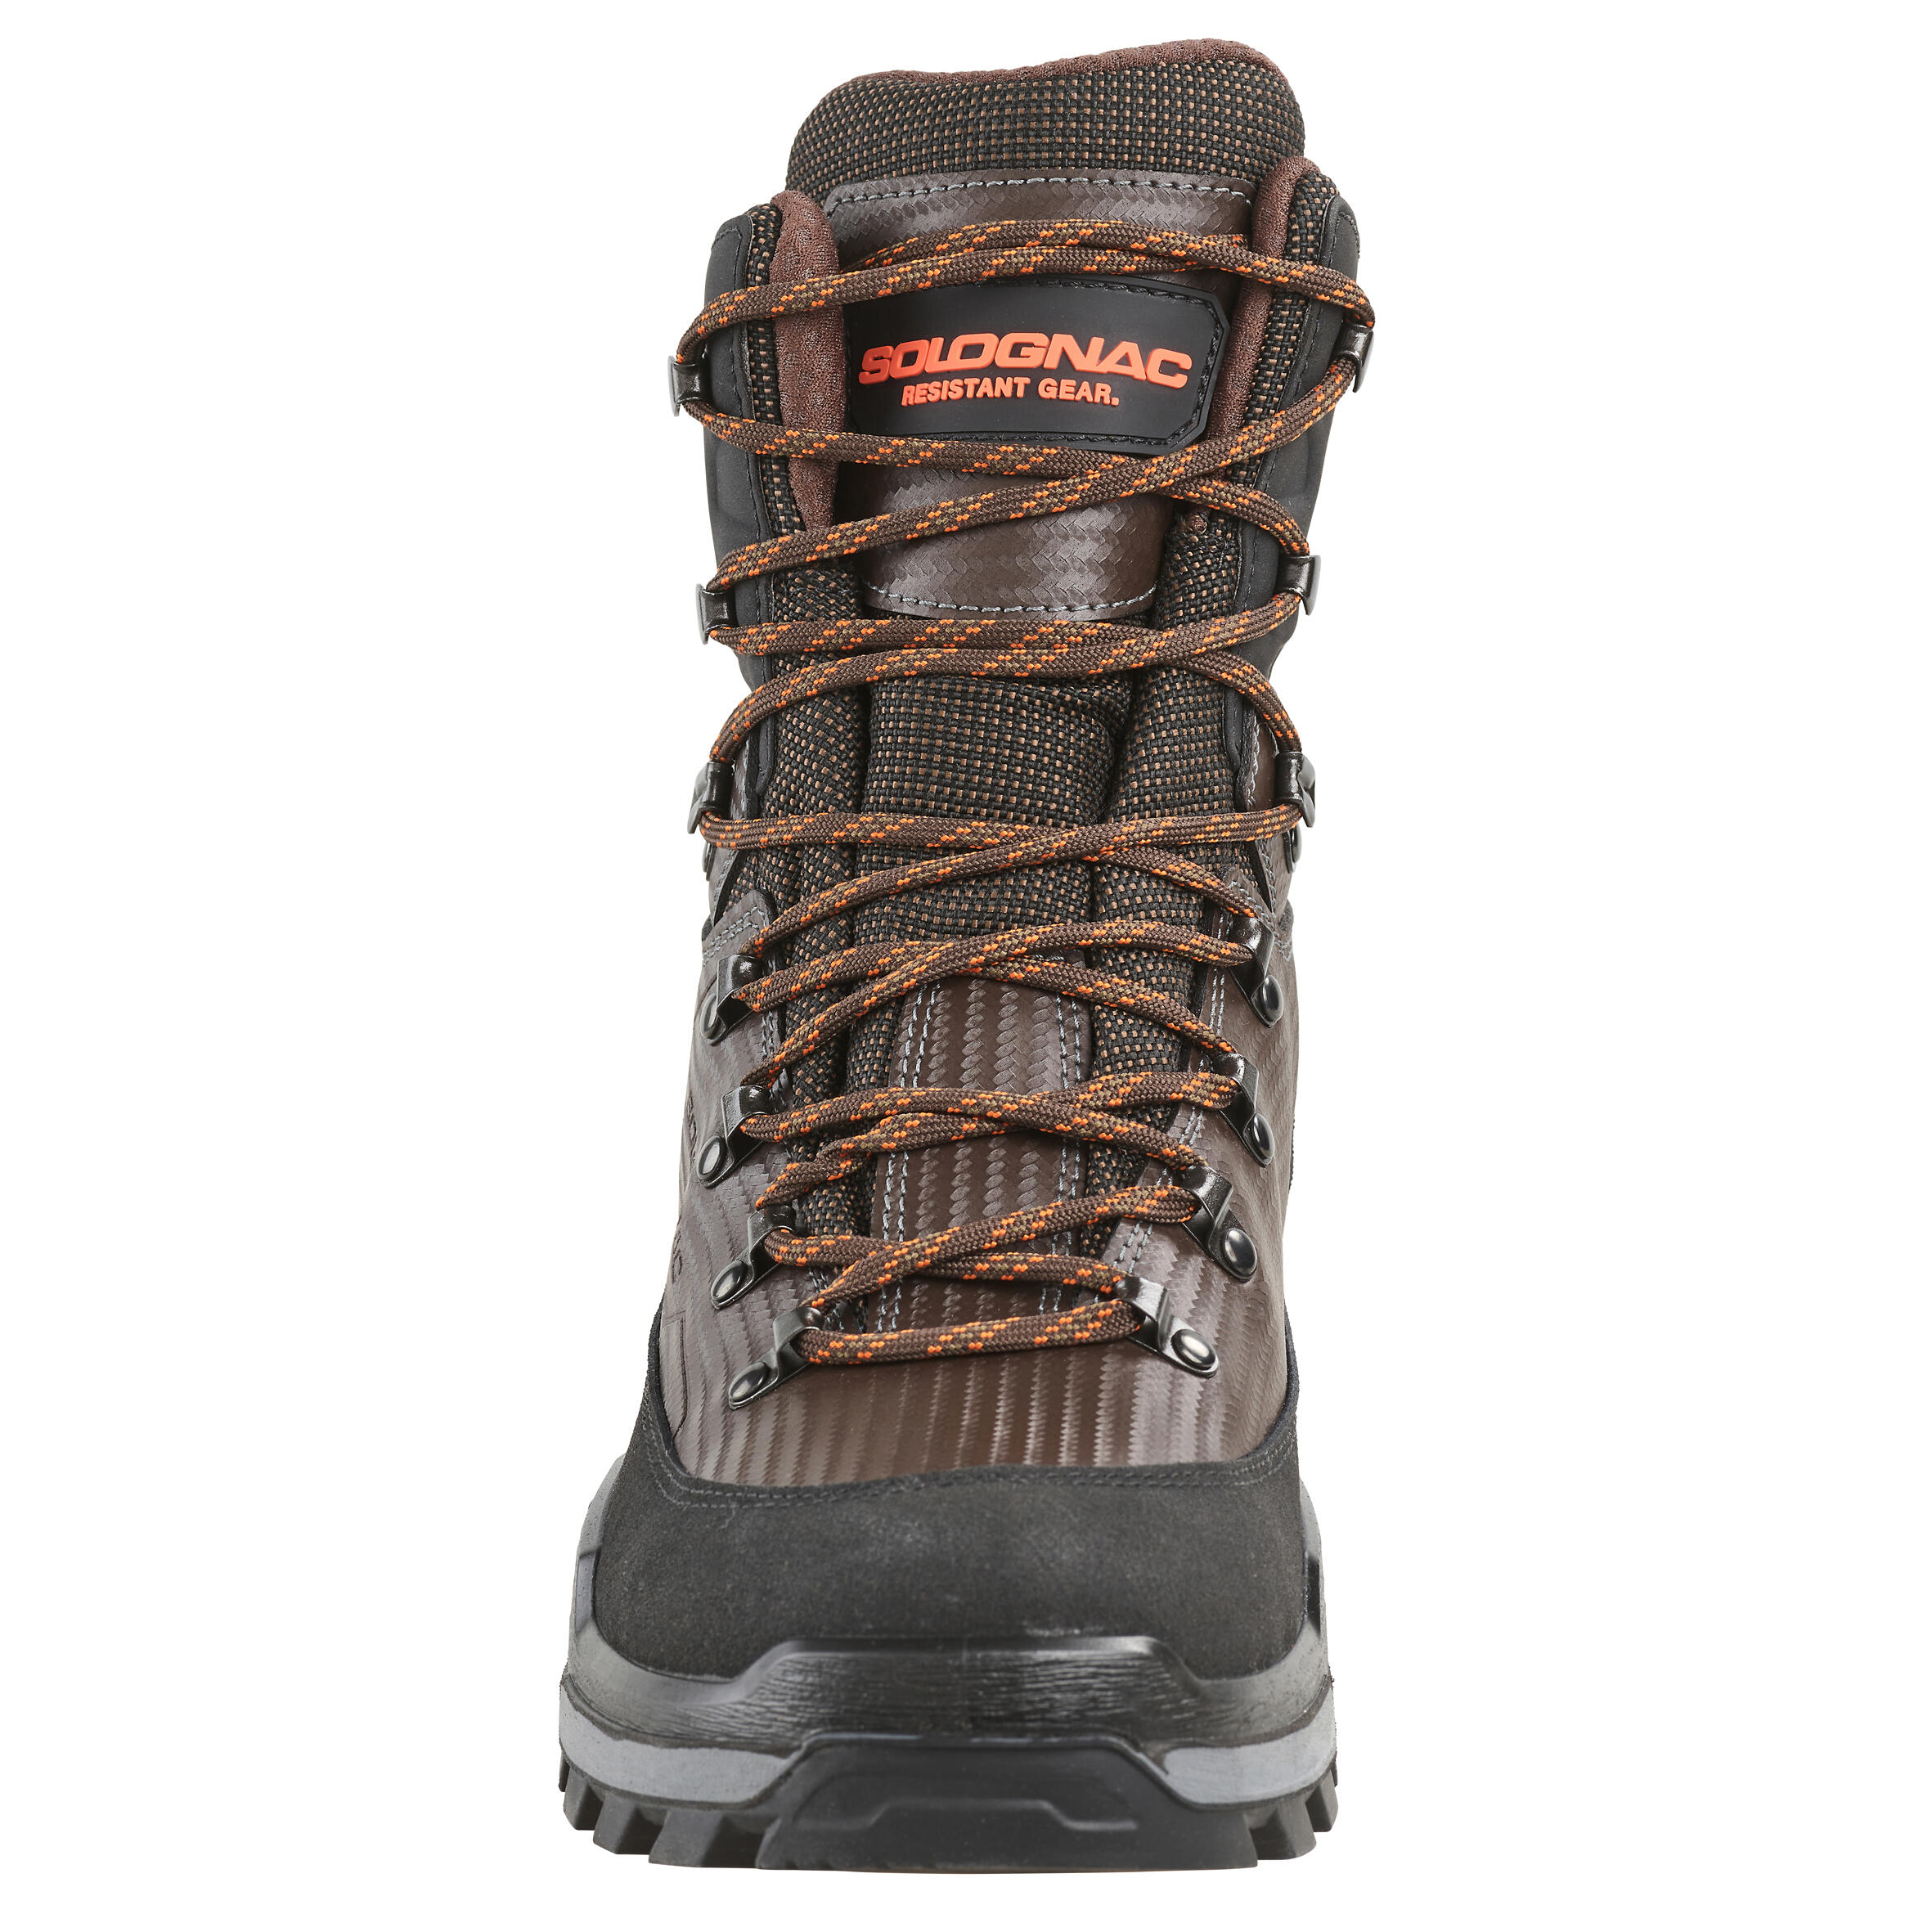 WATERPROOF AND DURABLE HUNTING BOOTS CROSSHUNT 900 - BROWN V2 4/5